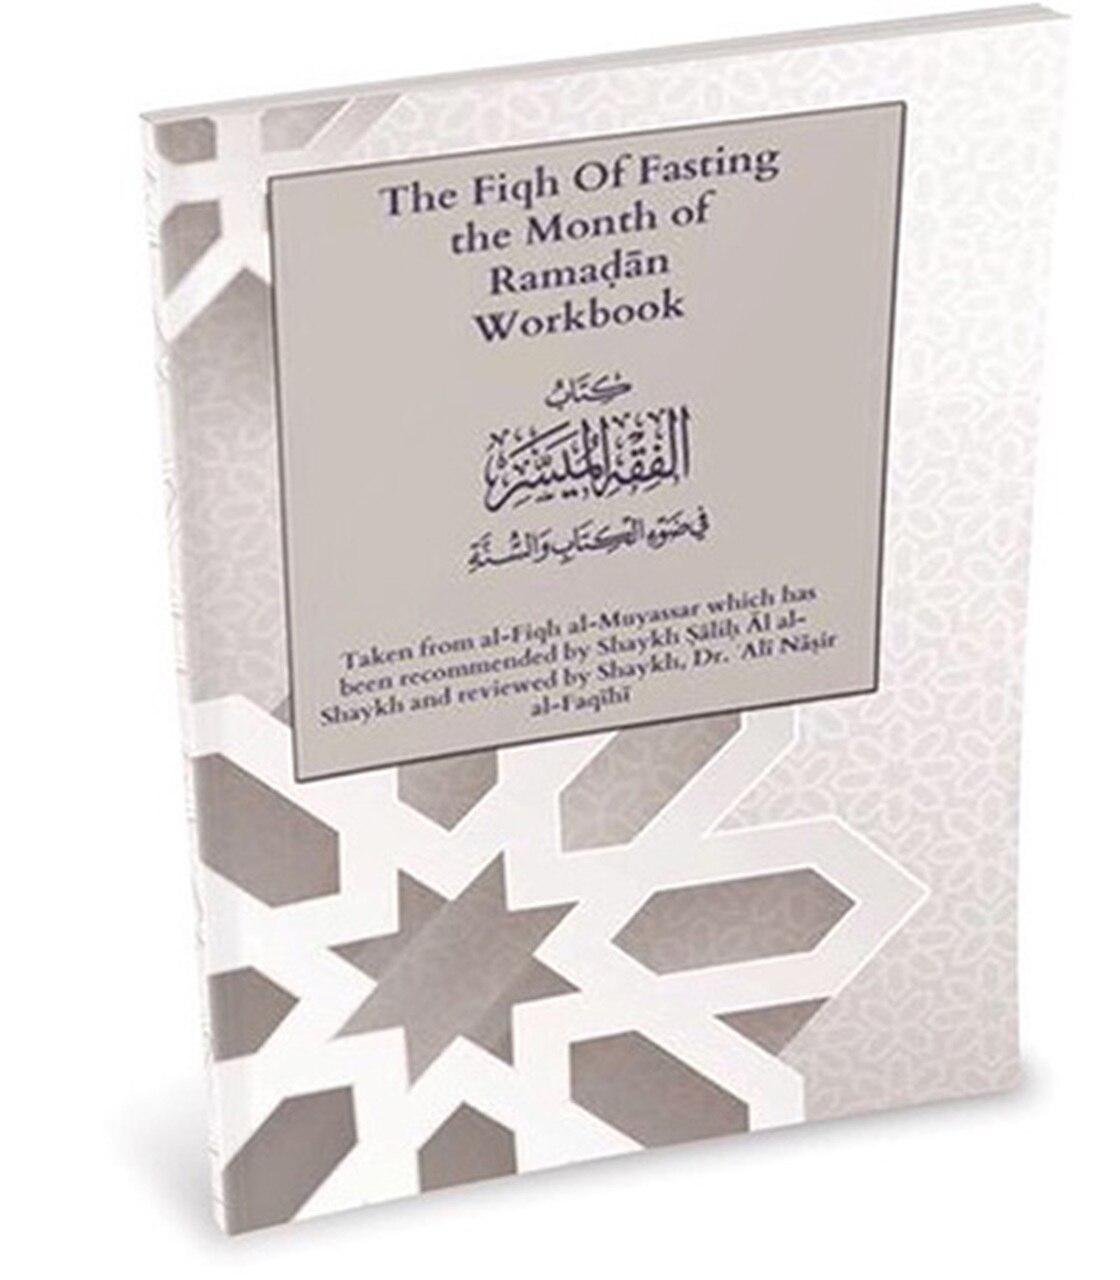 The Fiqh Of Fasting The Month Of Ramadan Workbook